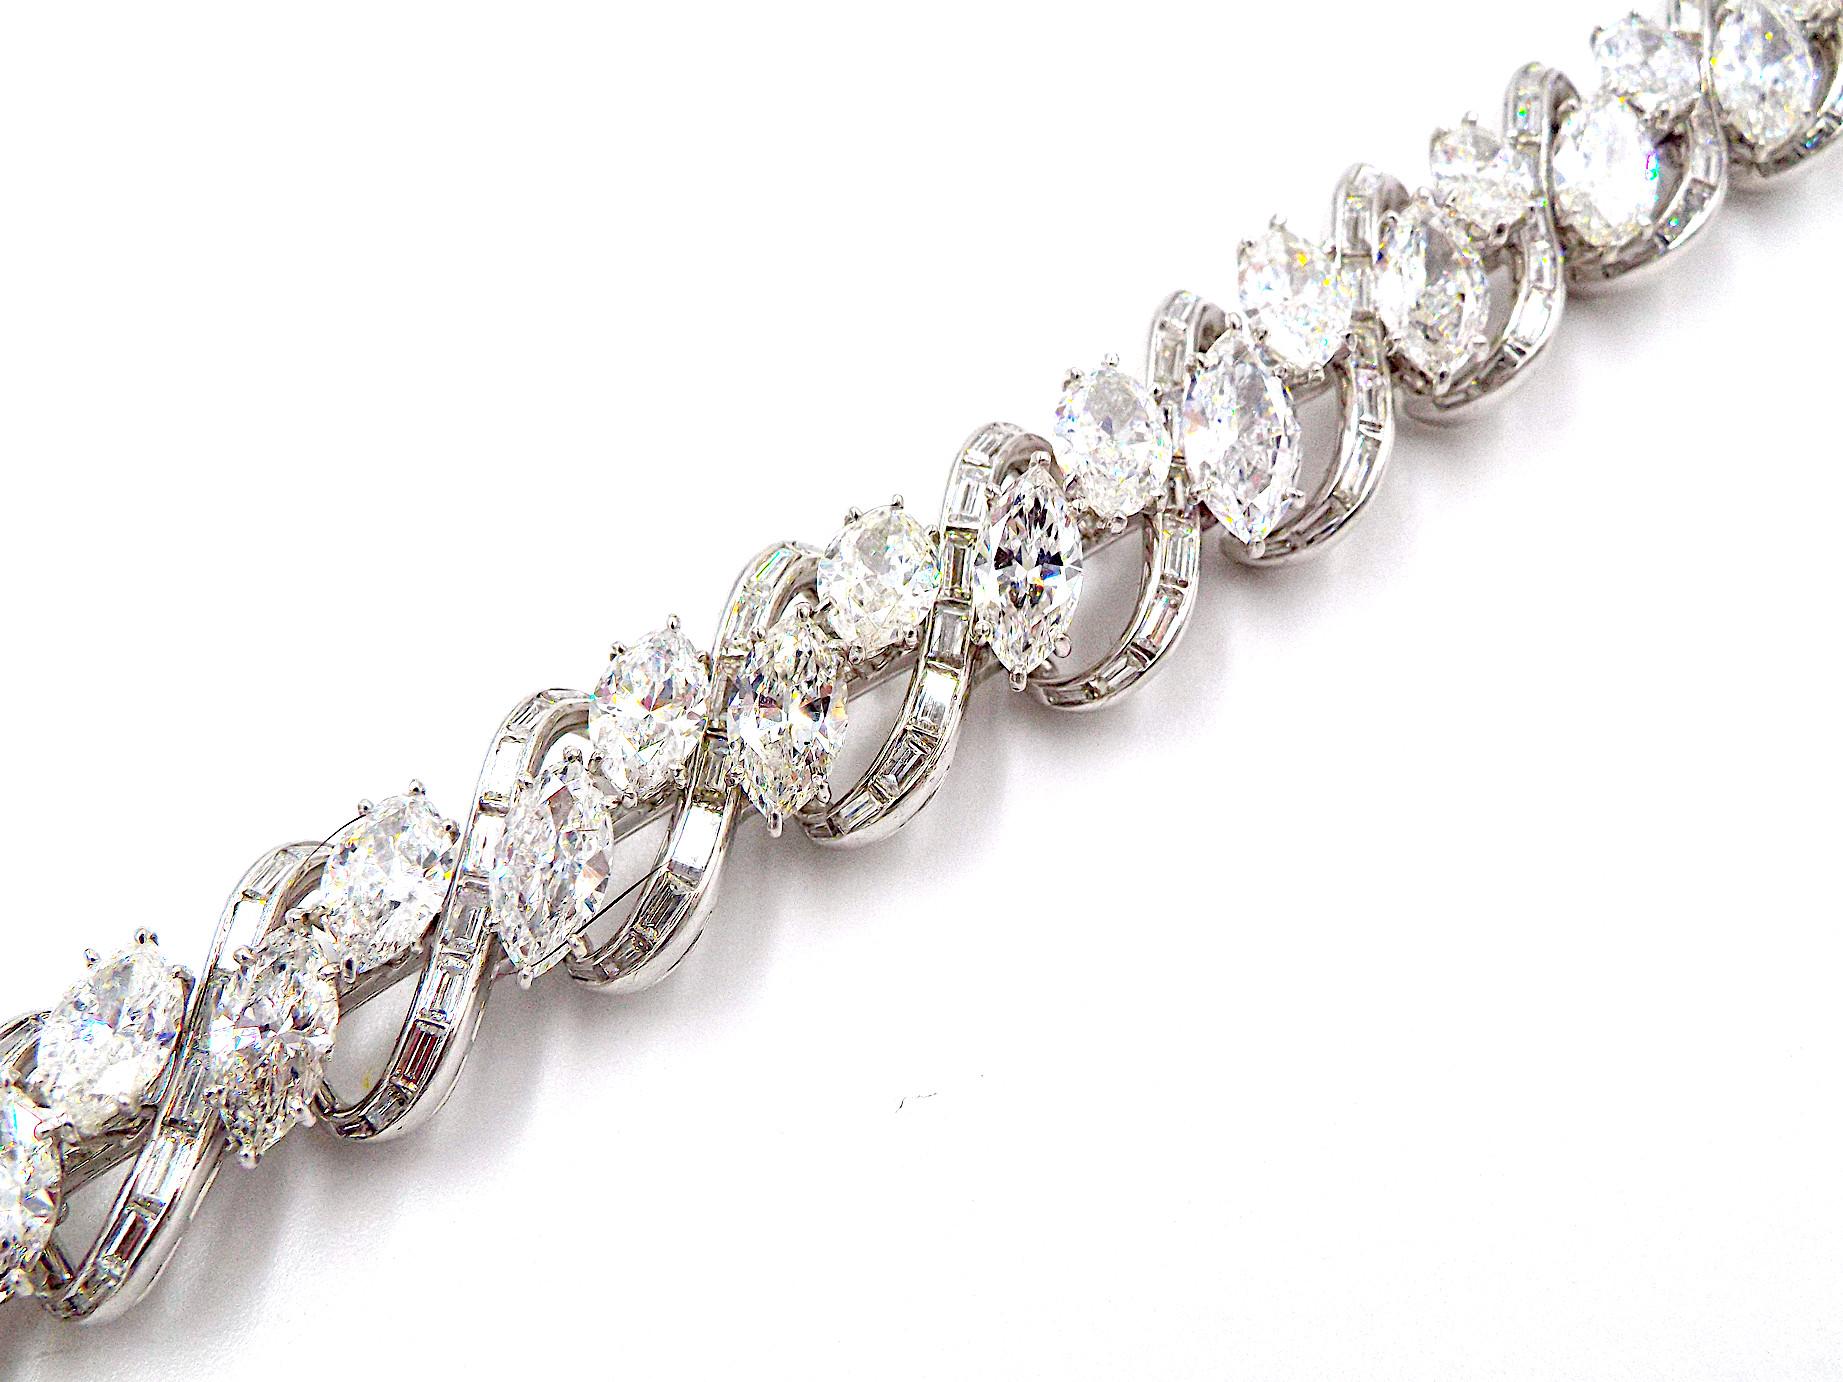 A diamond bracelet of openwork design, centrally set with marquise-shaped diamonds, accented by a stylized woven design, set with baguette-cut diamonds; estimated total diamond weight: 30.00 carats; mounted in platinum; length: 7in. Marquise-cut